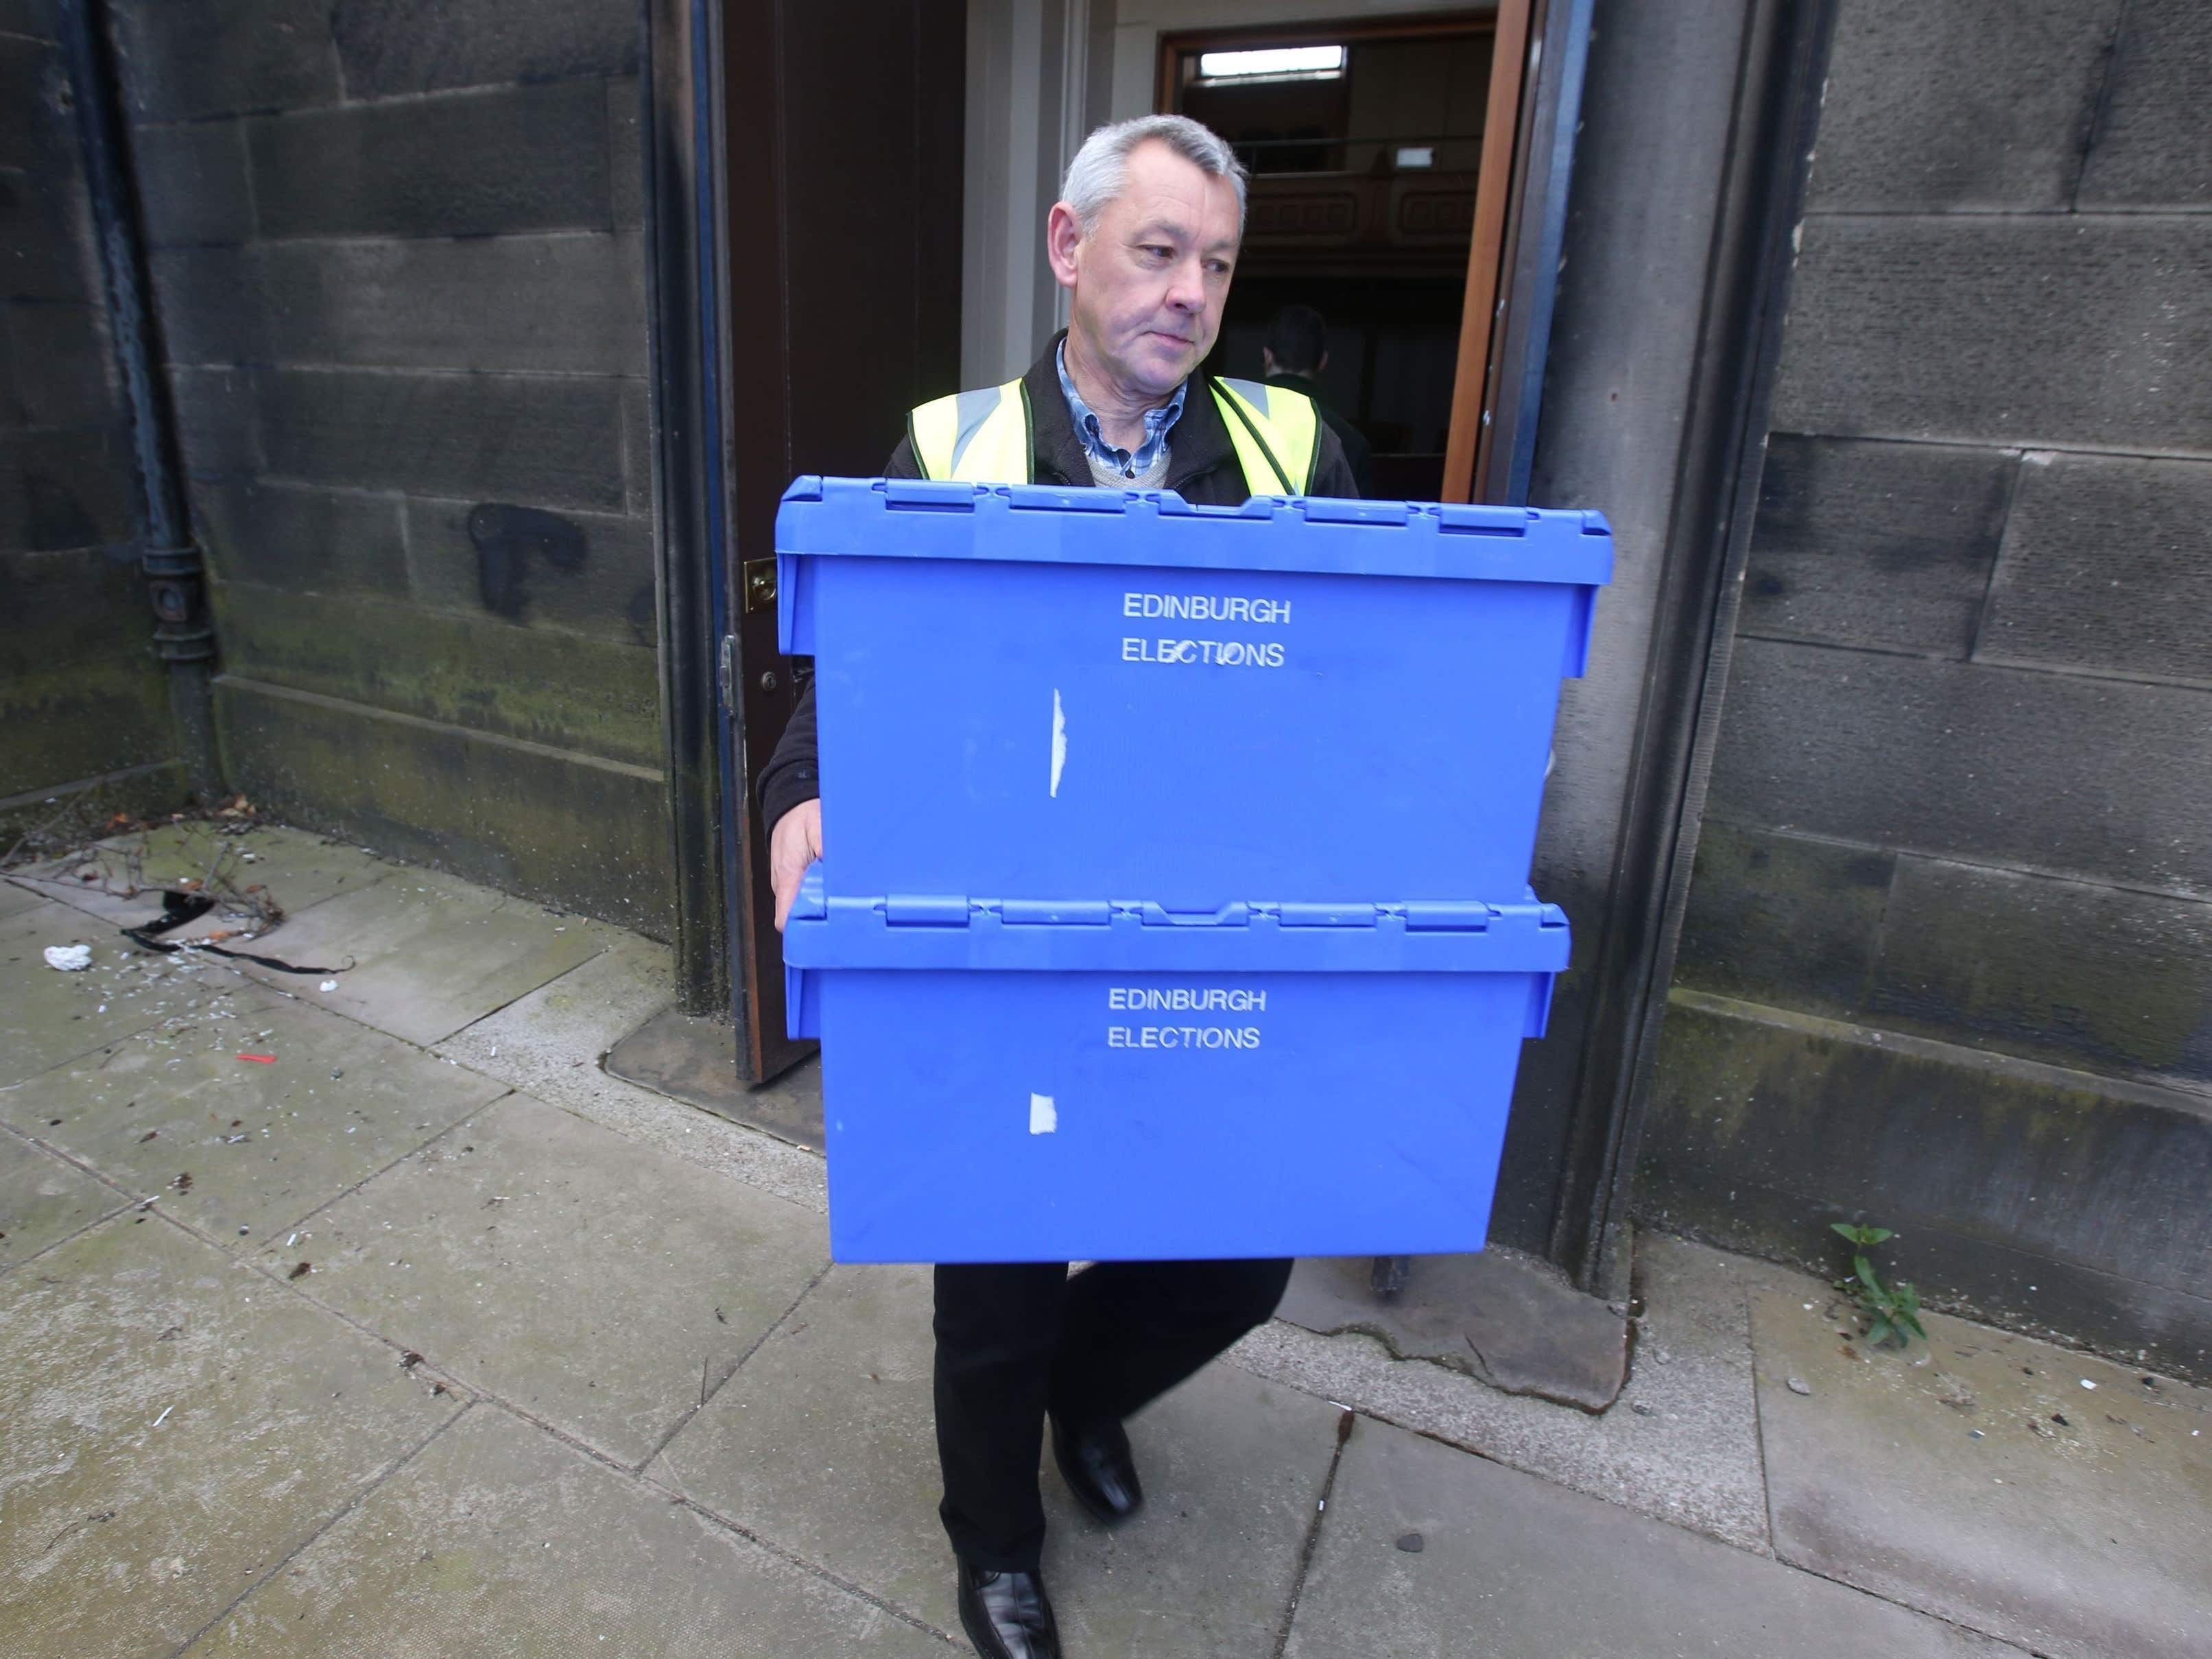 SNP could drop to 10 seats, exit poll suggests